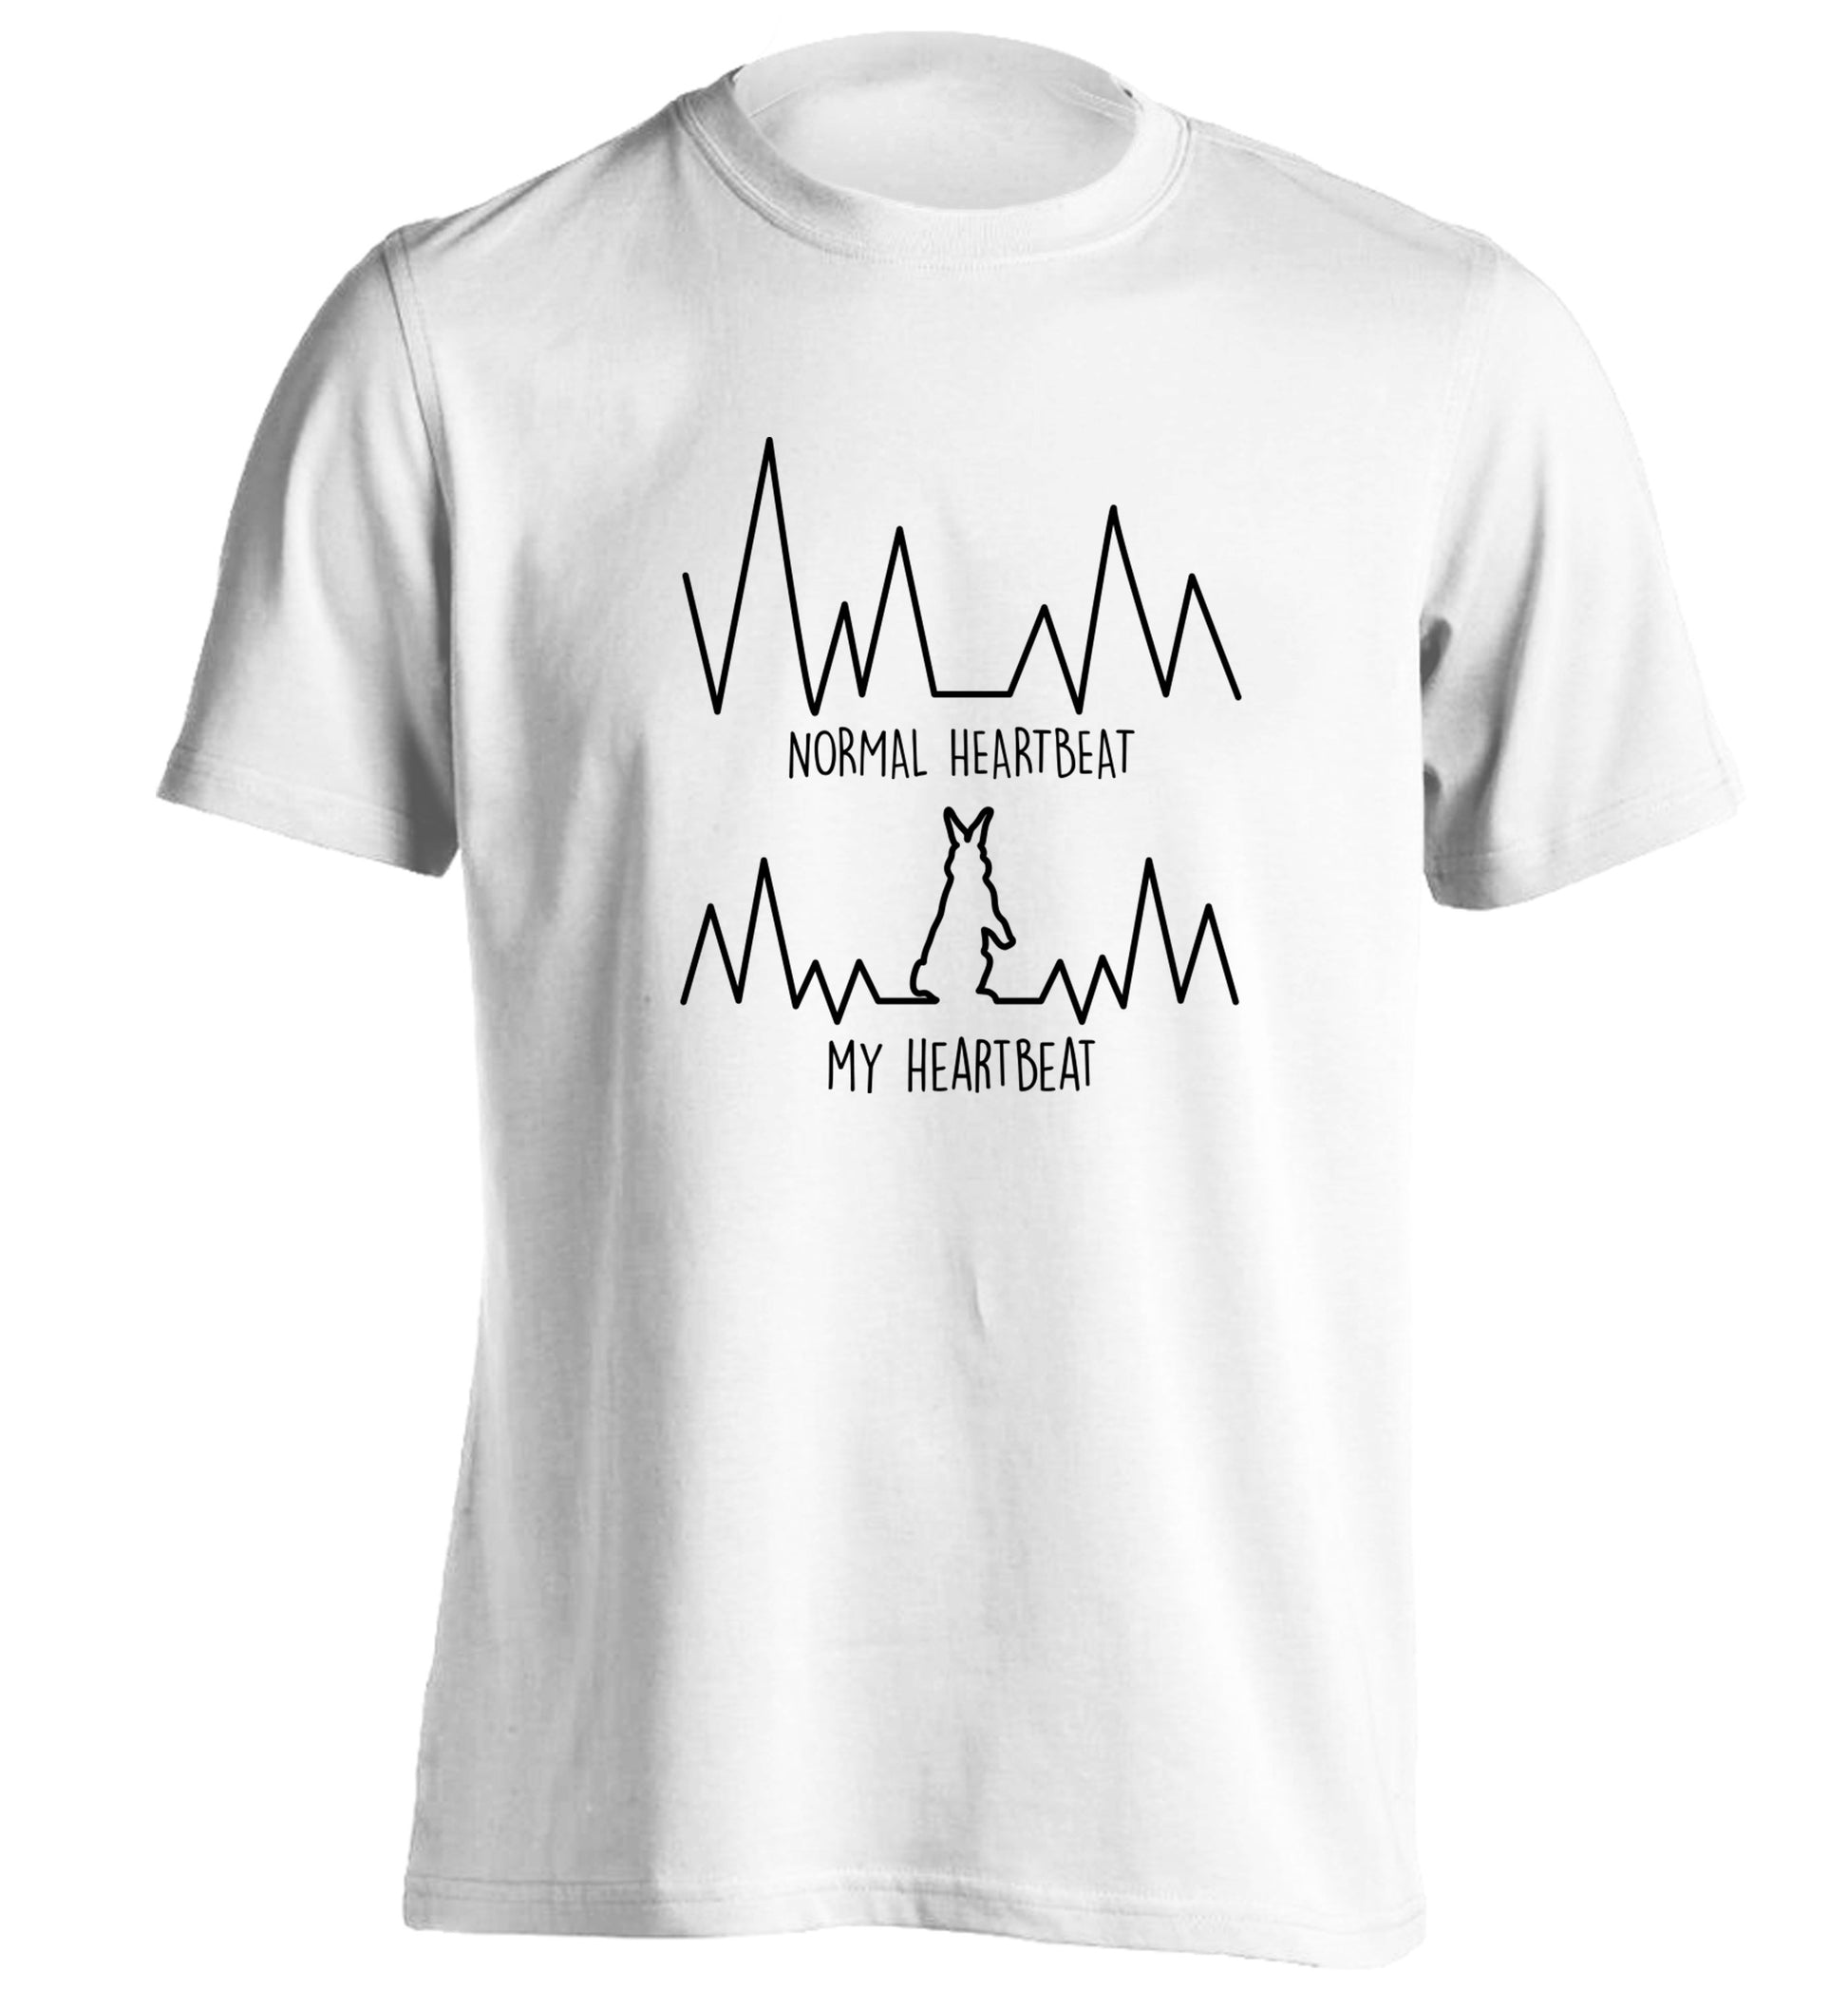 Normal heartbeat, my heartbeat rabbit lover adults unisex white Tshirt 2XL